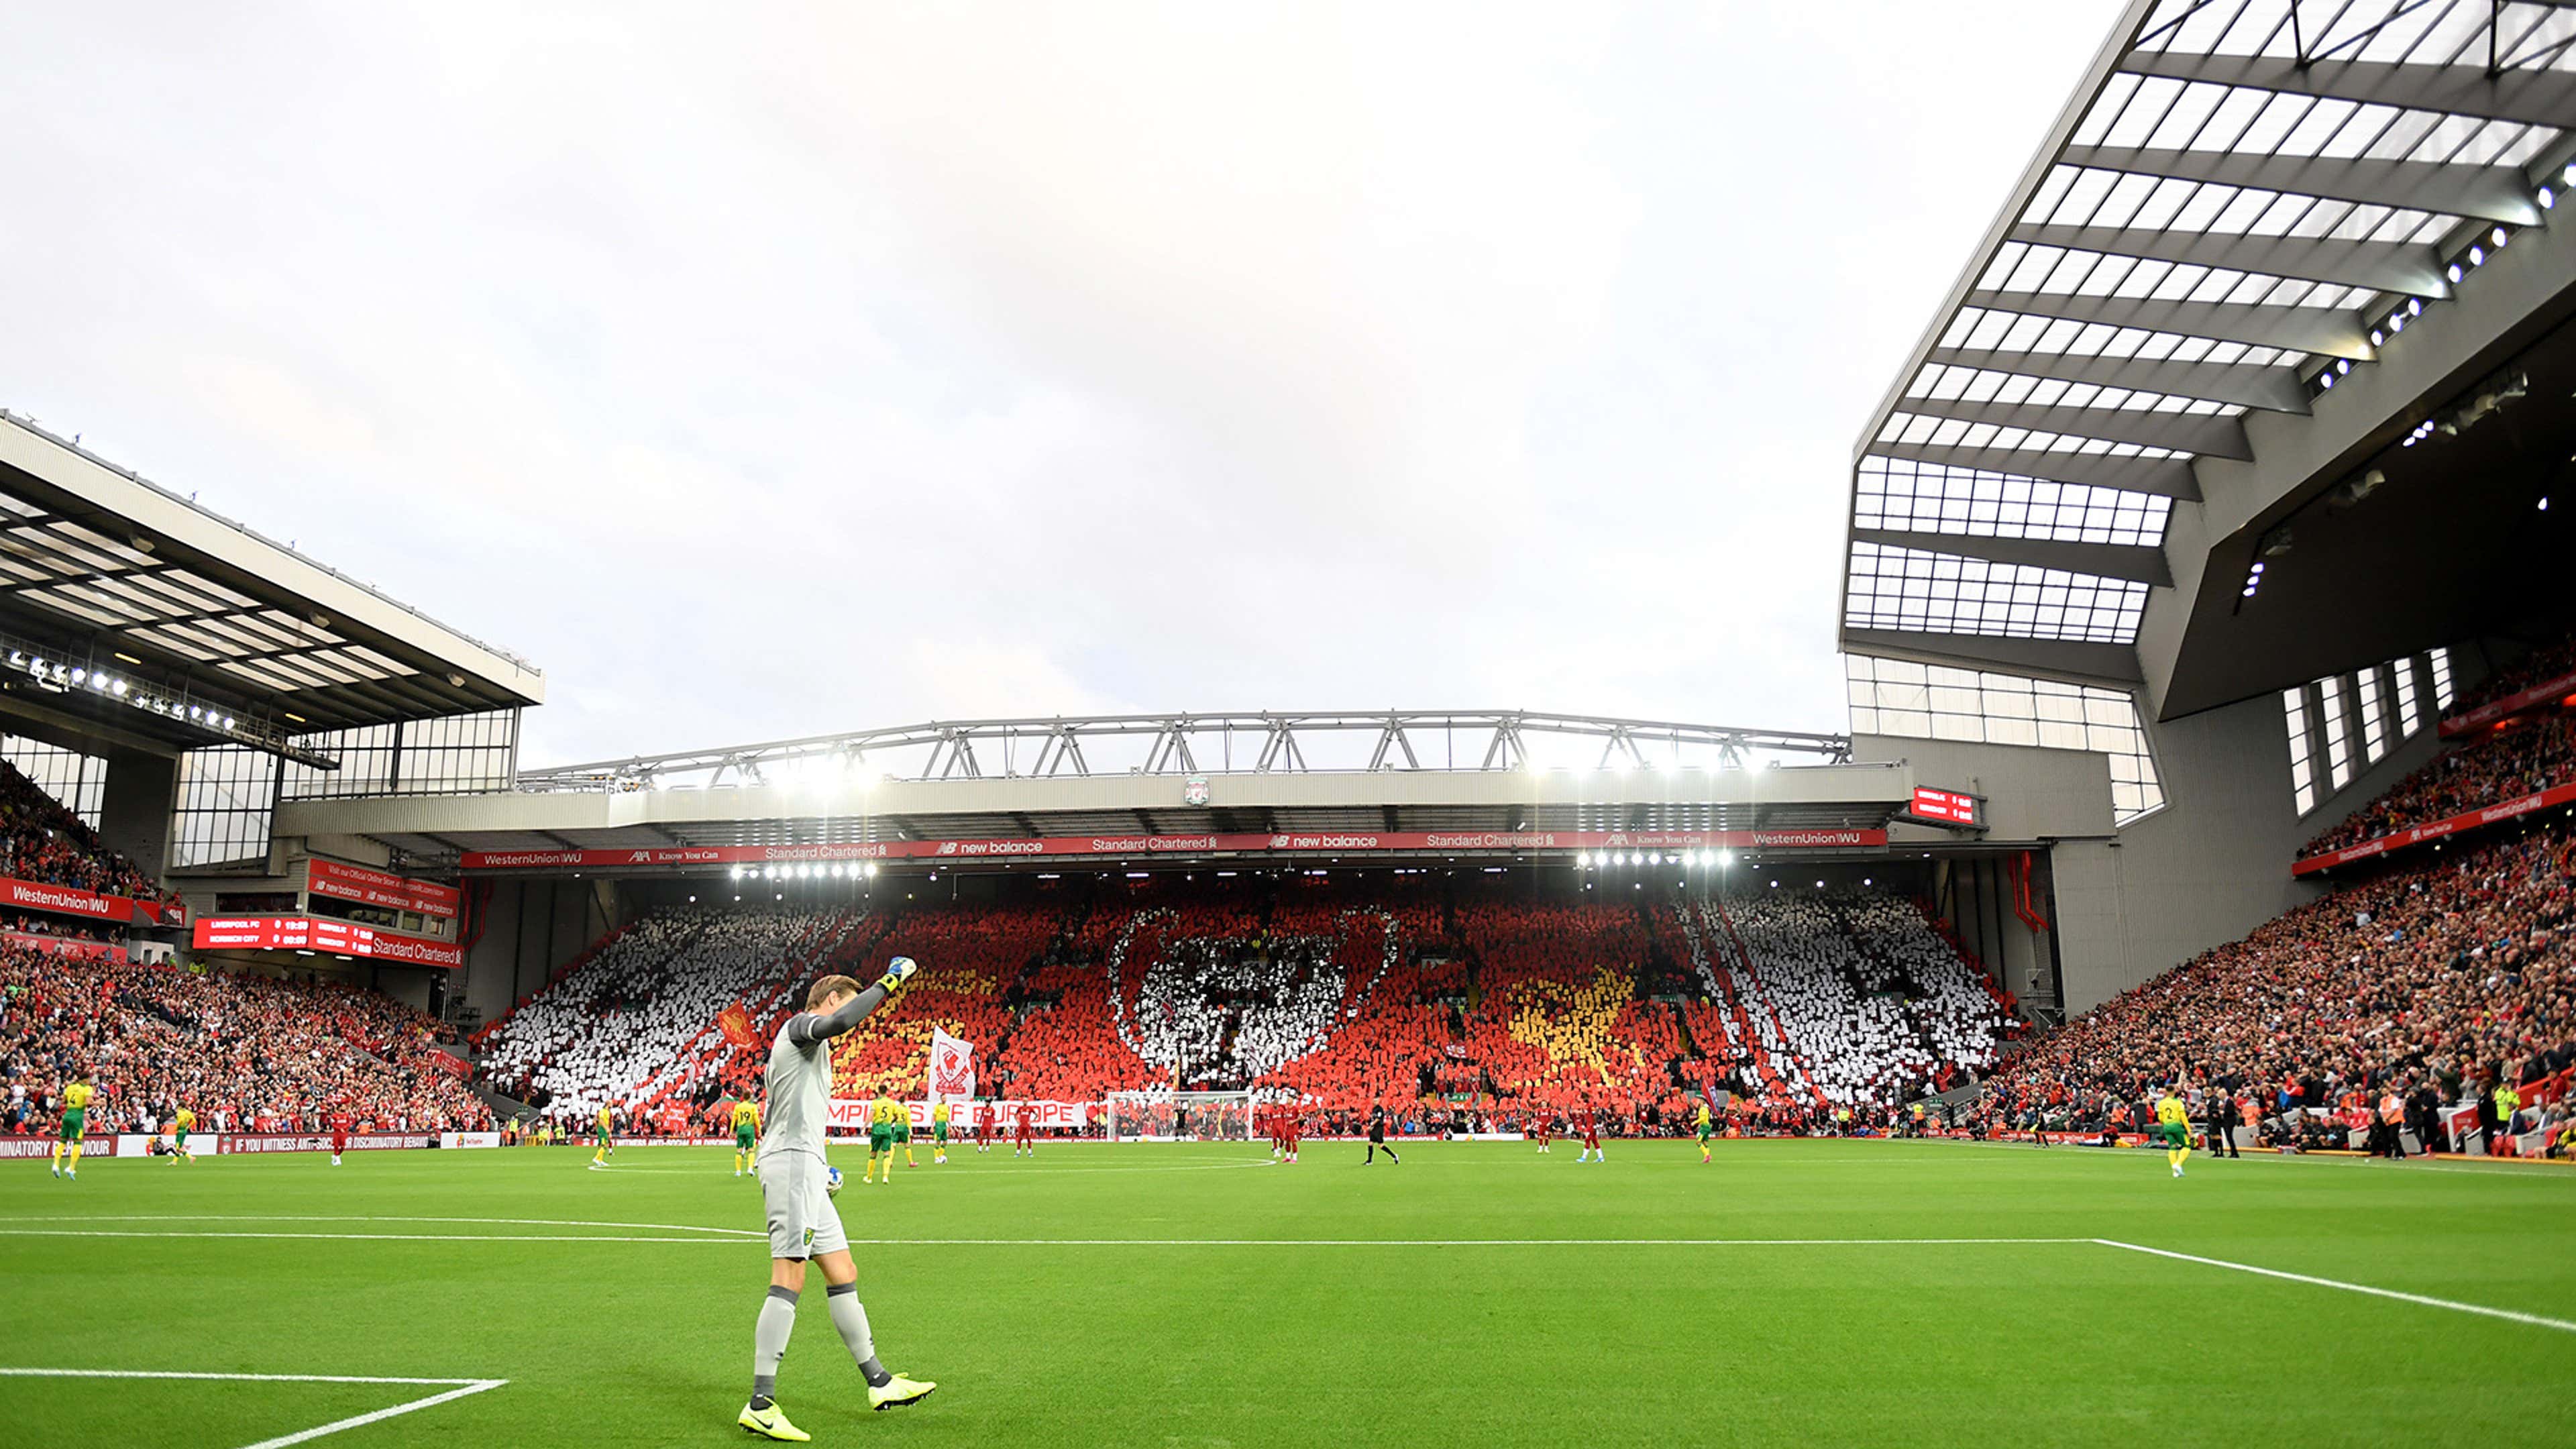 Anfield Liverpool tifo general view